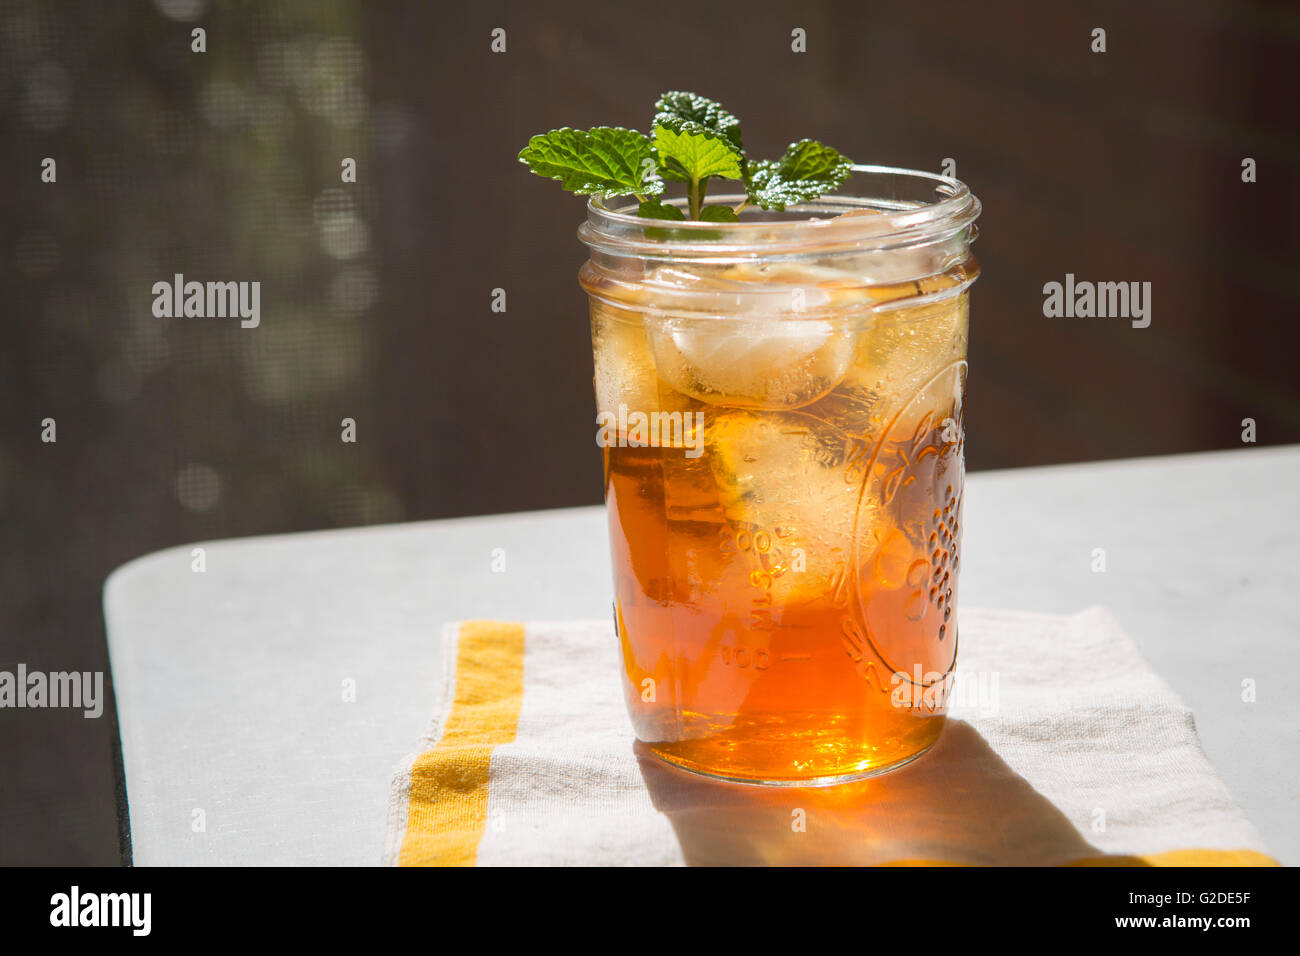 Iced Tea and Mint in Glass Jar Stock Photo